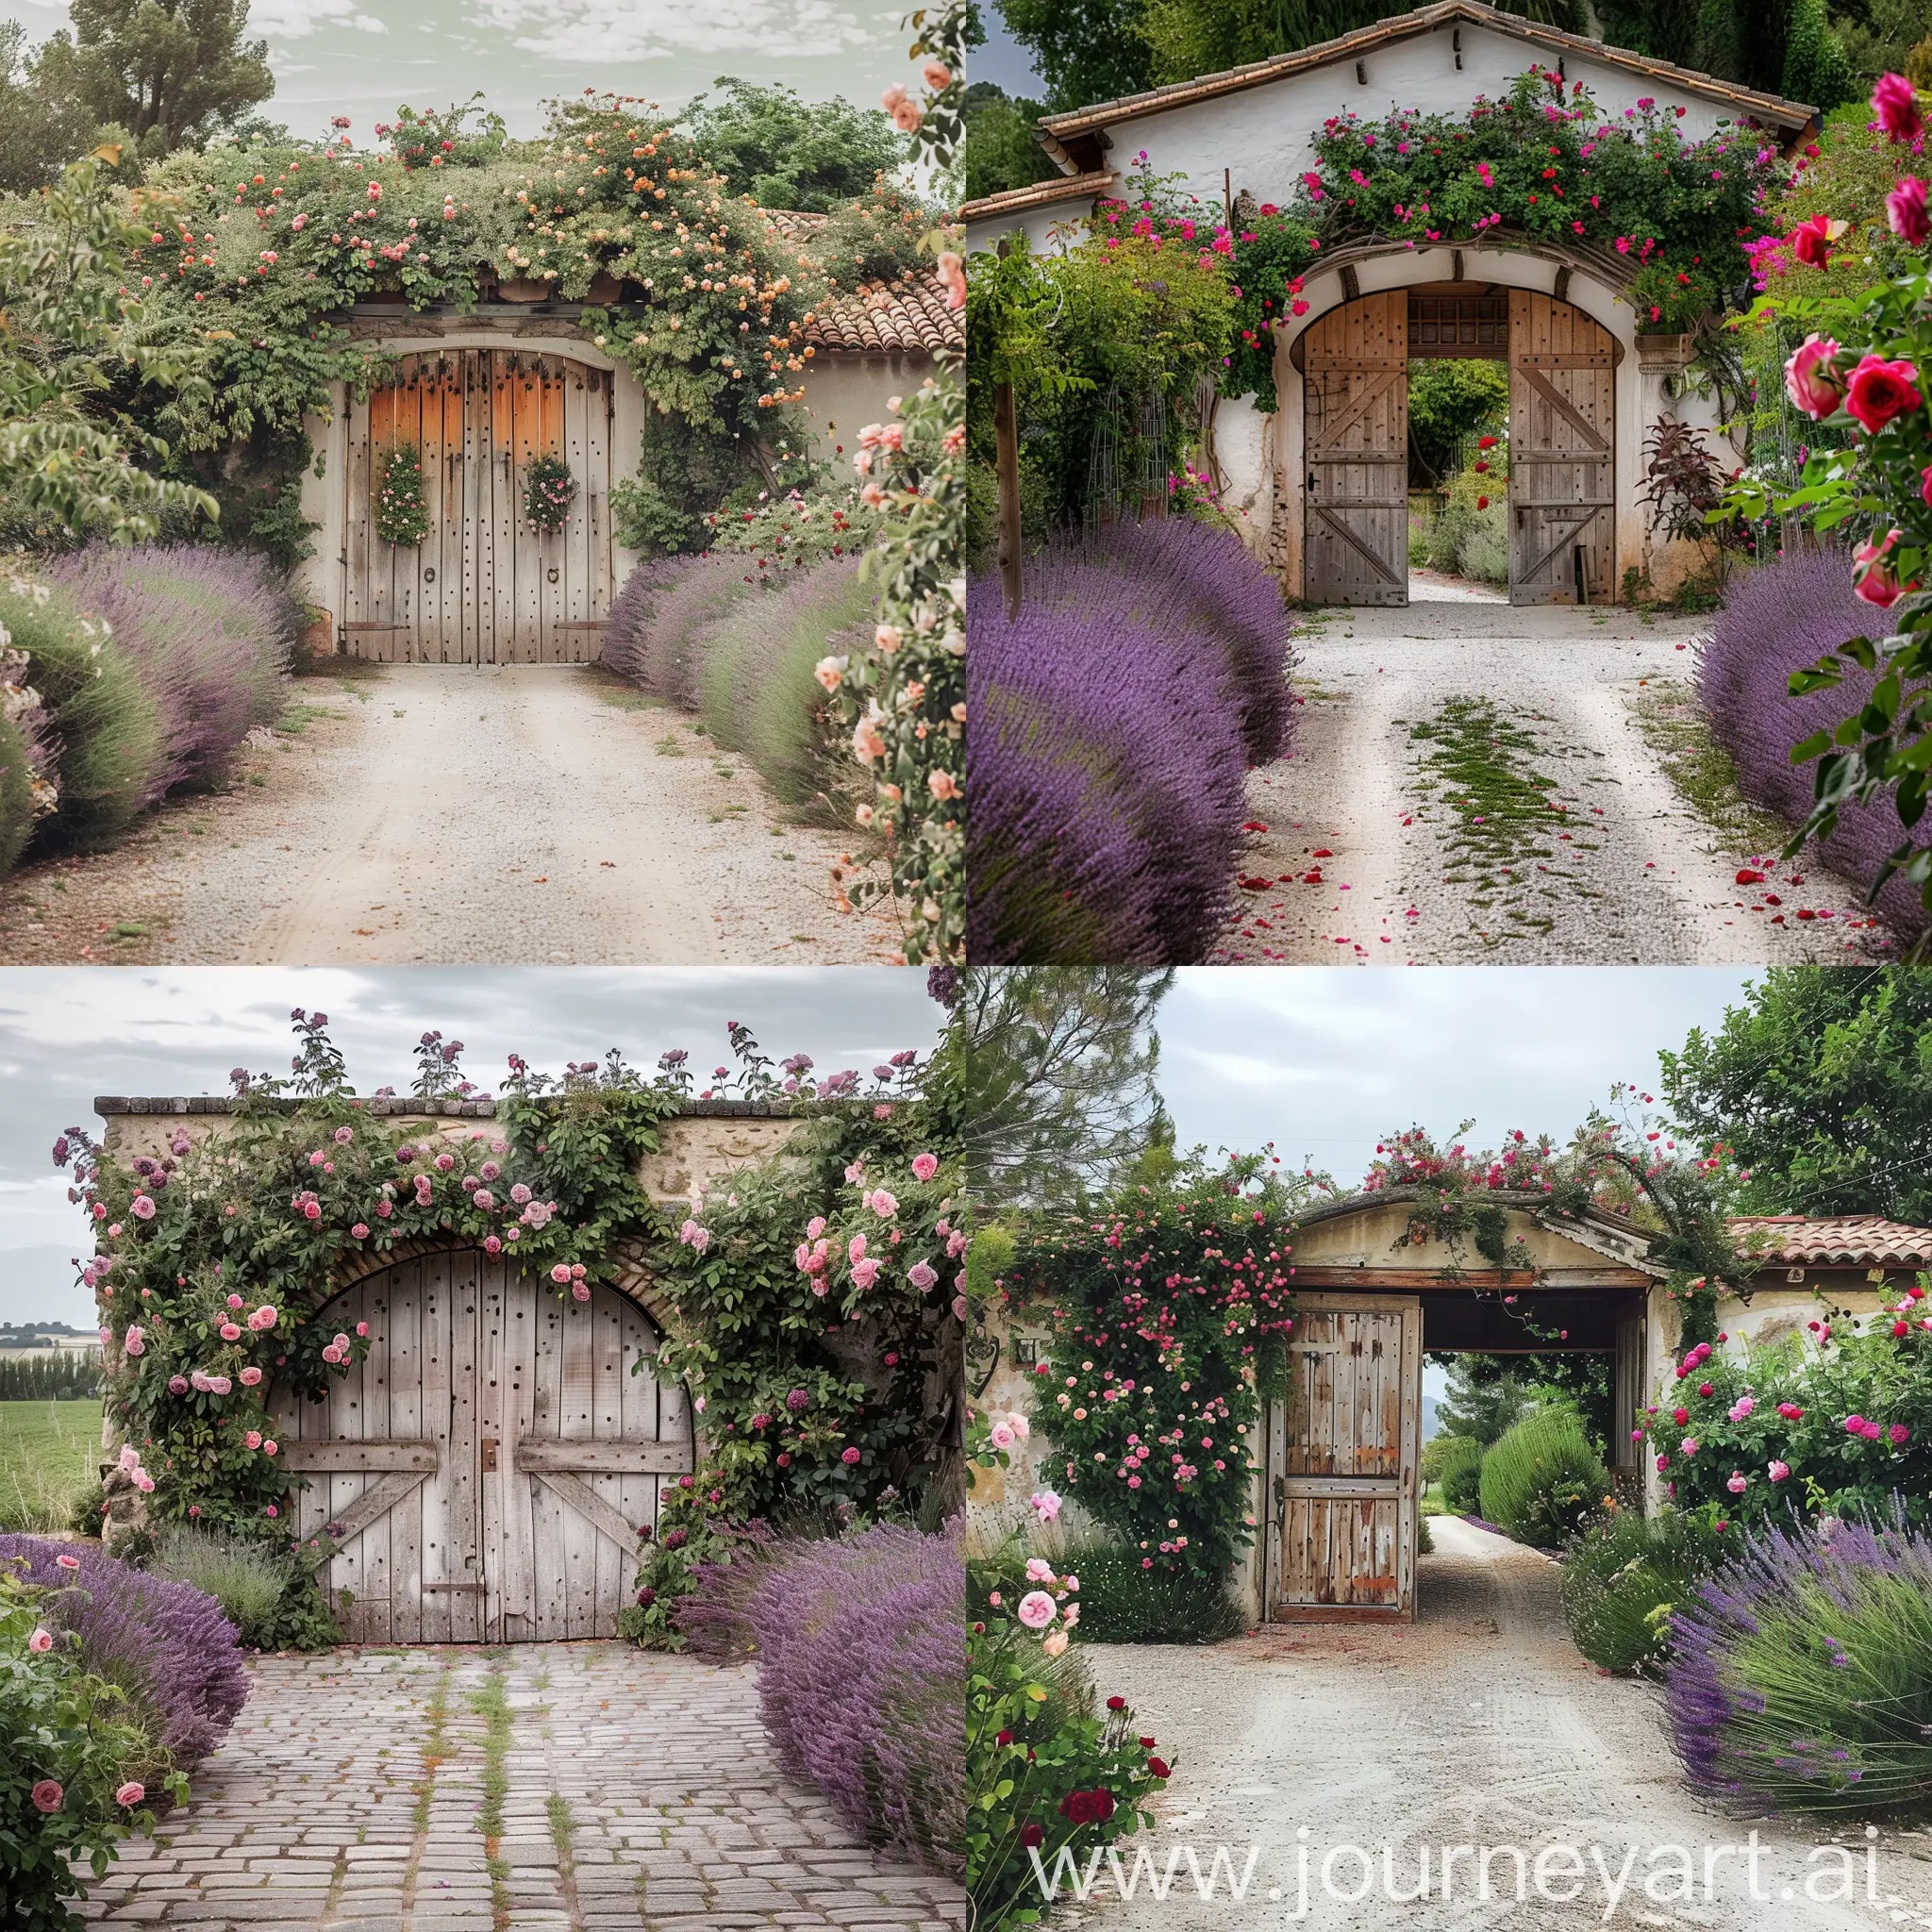 Vintage-Doors-and-Driveways-Enclosed-by-Rose-Bushes-and-Lavender